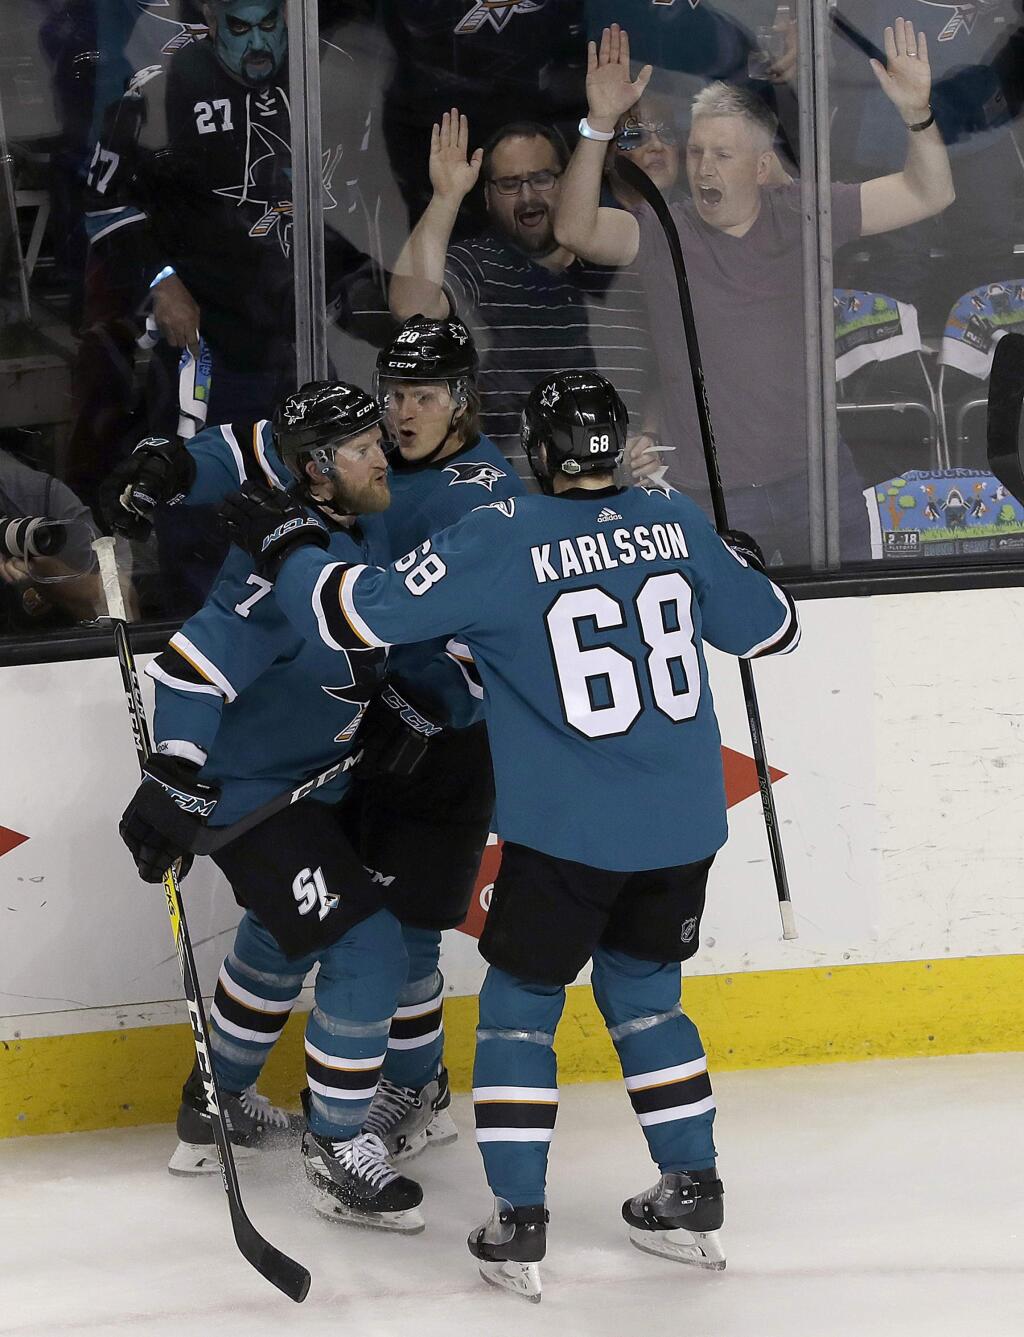 San Jose Sharks left wing Marcus Sorensen, center, is congratulated by defenseman Paul Martin (7) and right wing Melker Karlsson (68), from Sweden, after scoring a goal against the Anaheim Ducks during the first period of Game 4 of an NHL hockey first-round playoff series in San Jose, Calif., Wednesday, April 18, 2018. (AP Photo/Jeff Chiu)